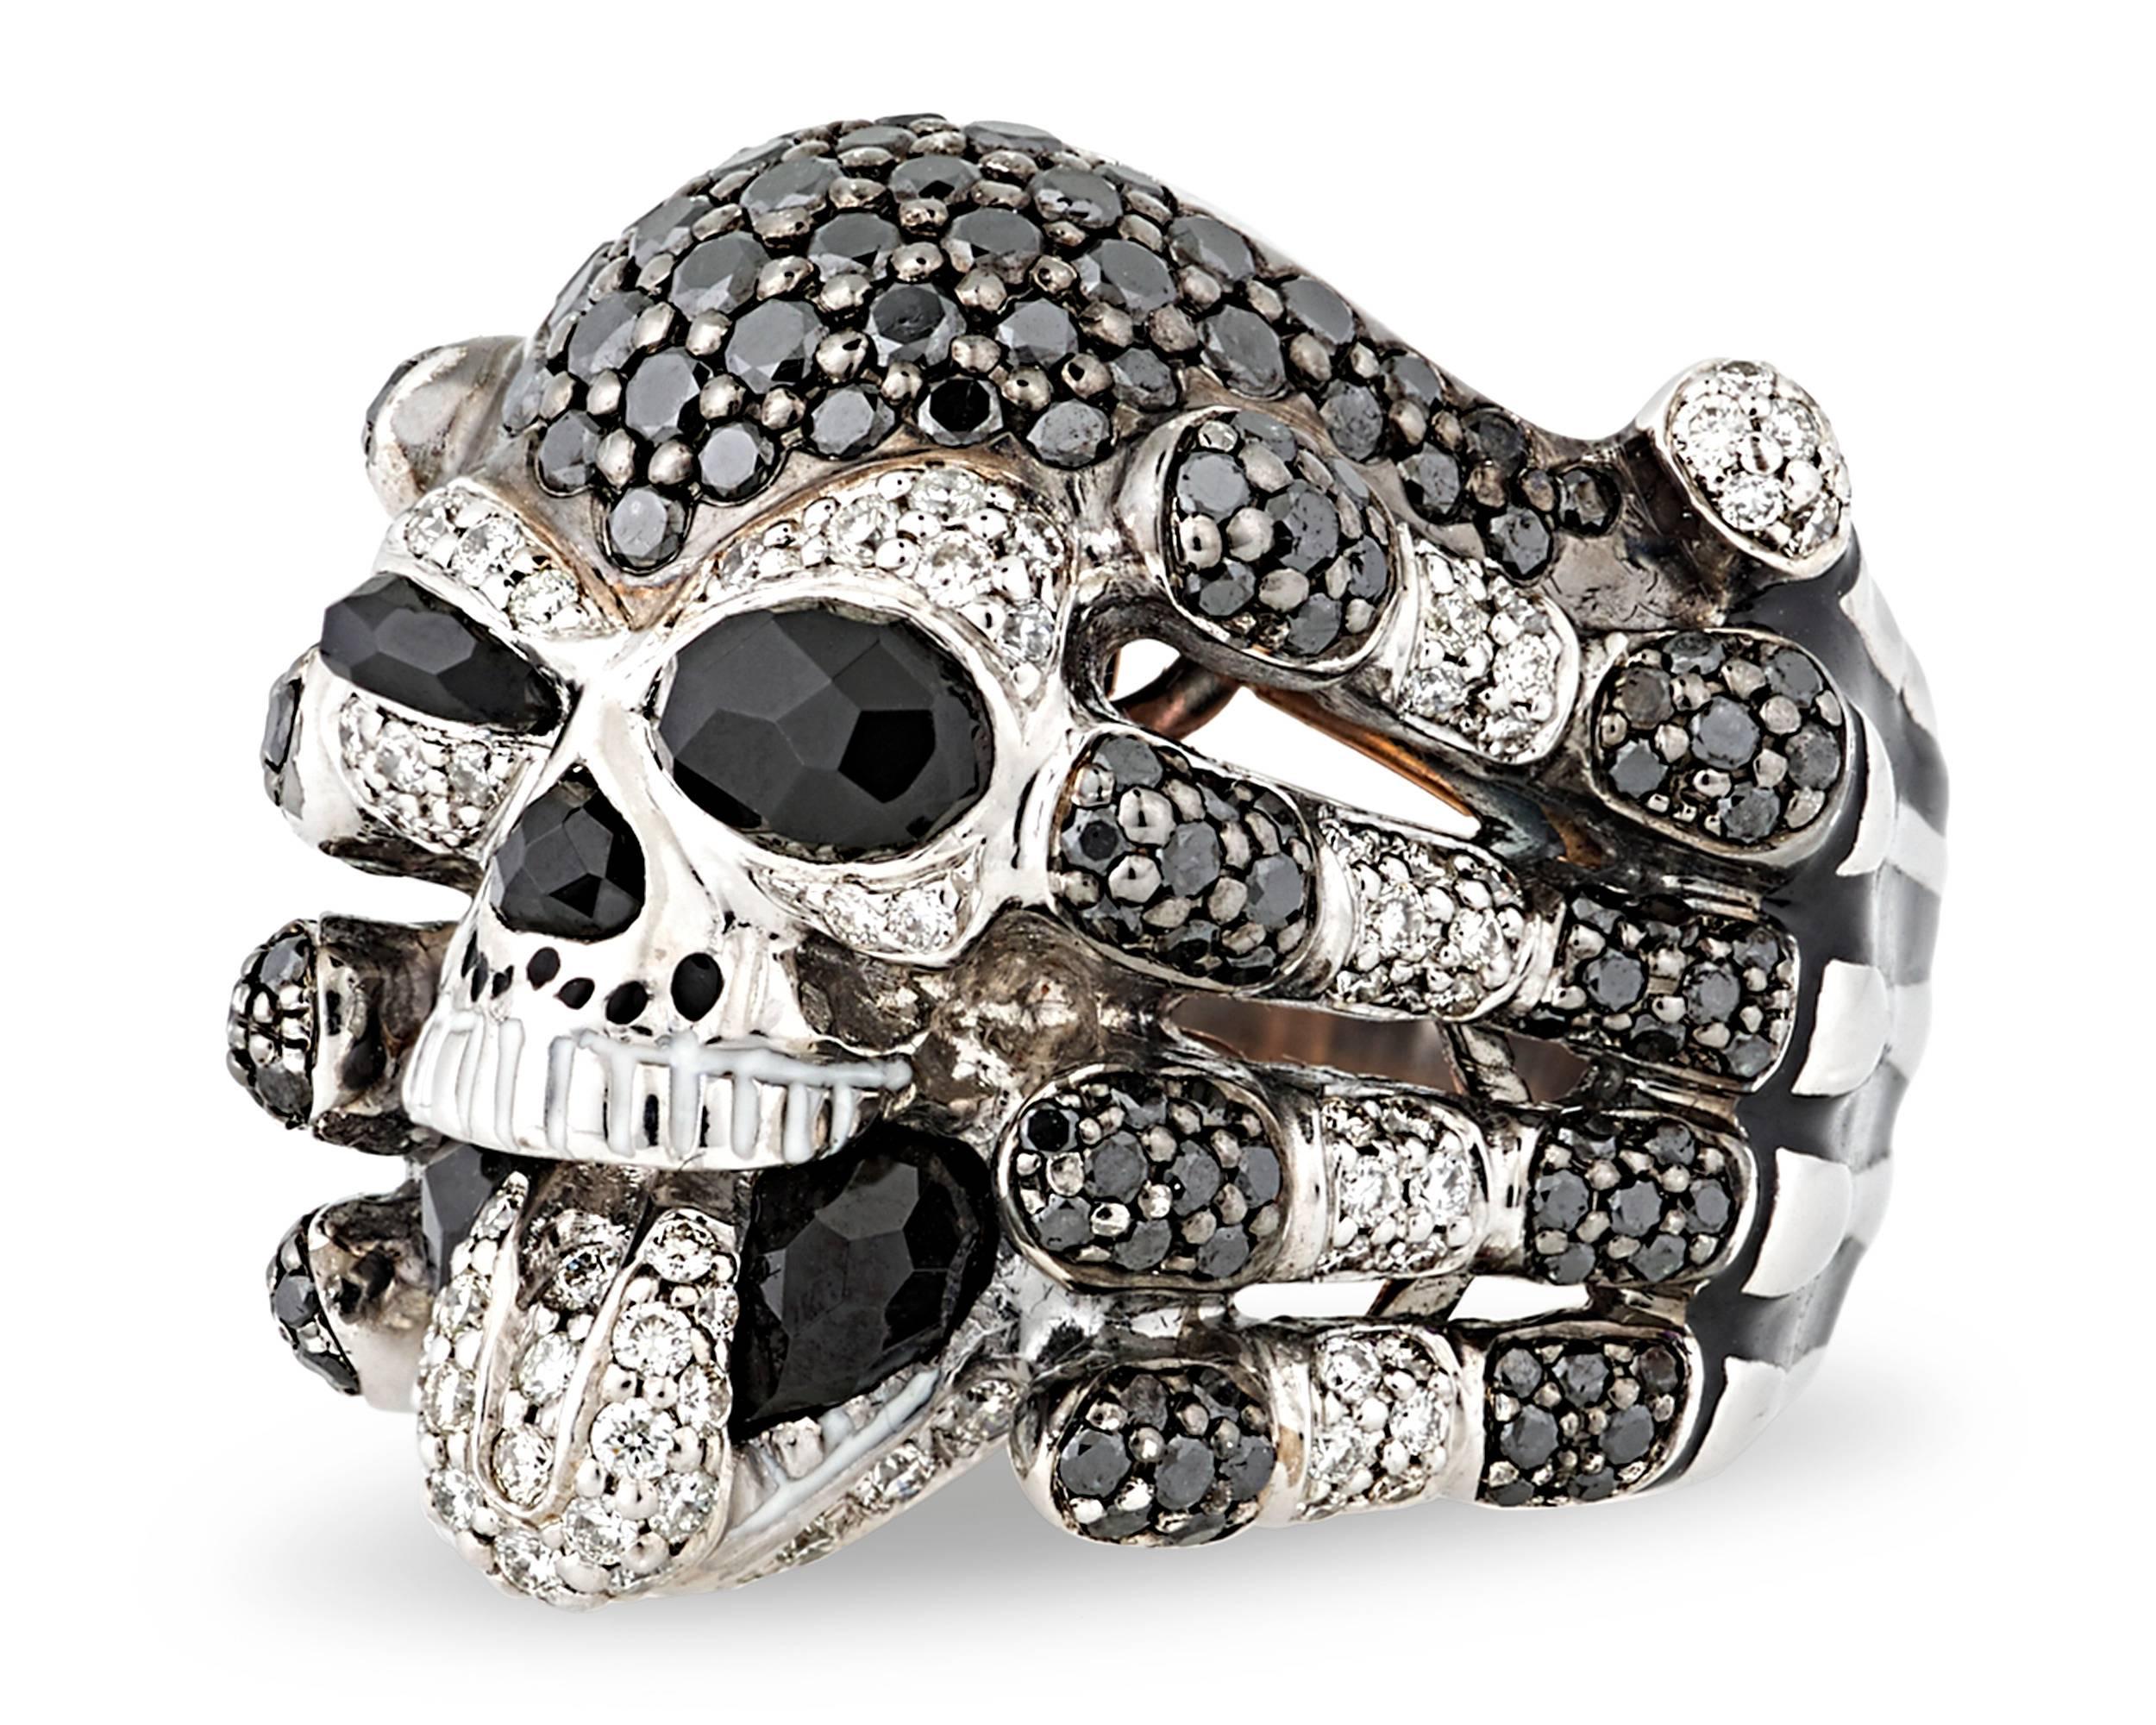 A cheeky skull sticks out his diamond-encrusted tongue in this beautifully macabre ring. Held aloft by a band crafted in the form of skeletal hands, the skull is set with 2.92 total carats of spinels in its eyes, nose, and mouth. Black diamonds